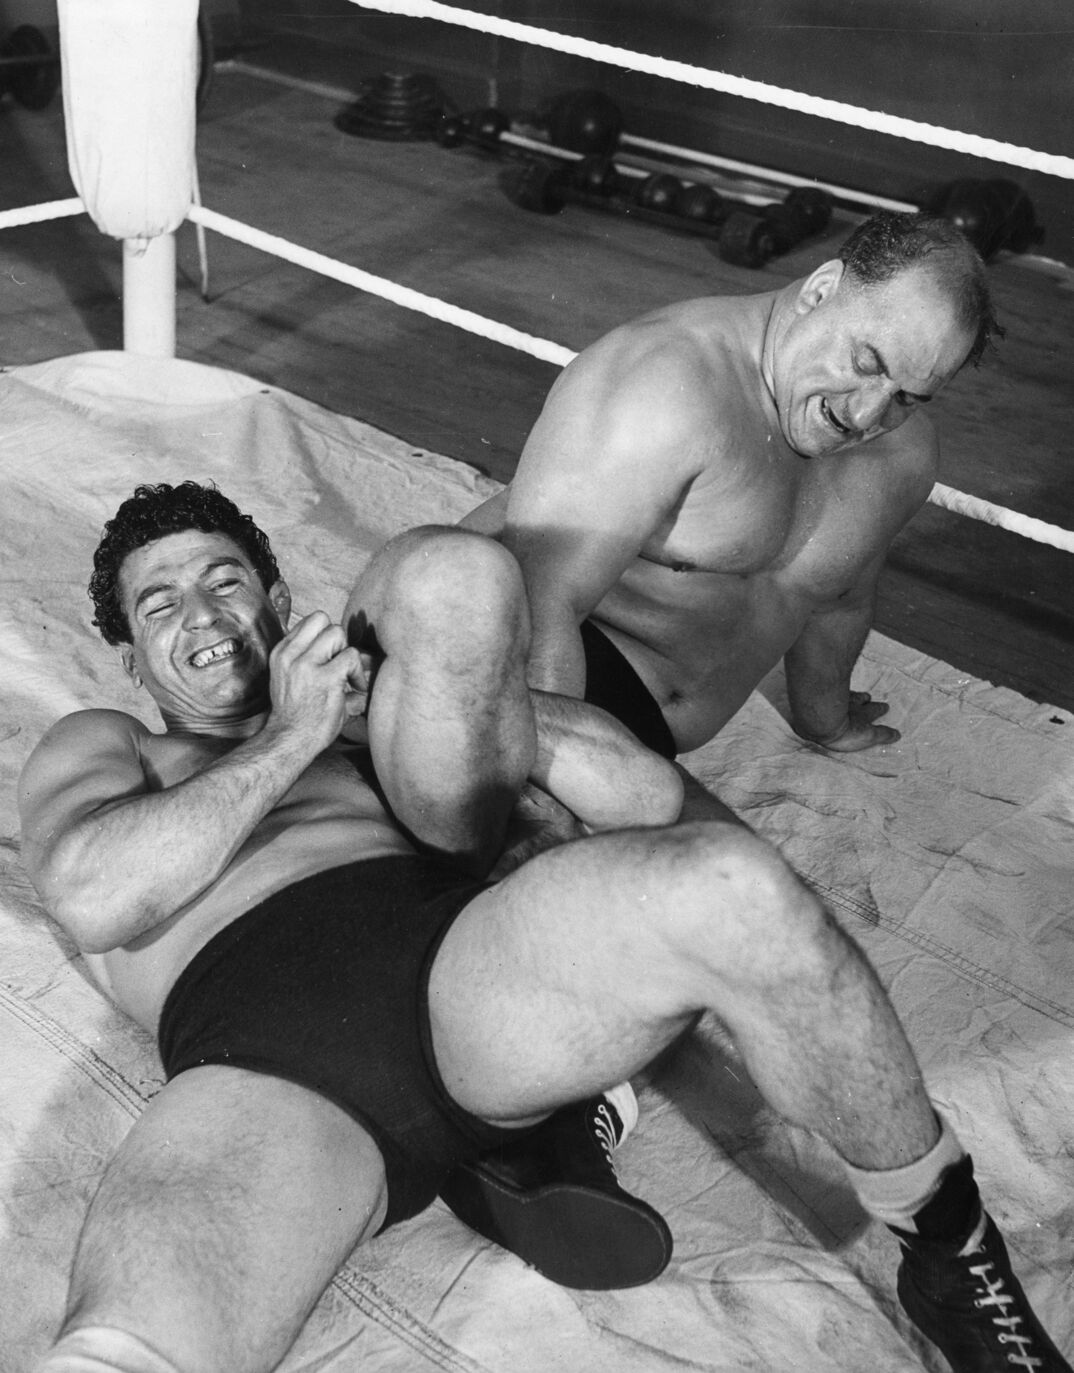 Black-and-white image. In a white wrestling ring, a young shirtless man with curly hair, wearing tight black shorts, lays on his back. His left bicep is wrapped around the leg of another muscular shirtless man on his left as the two wrestle.